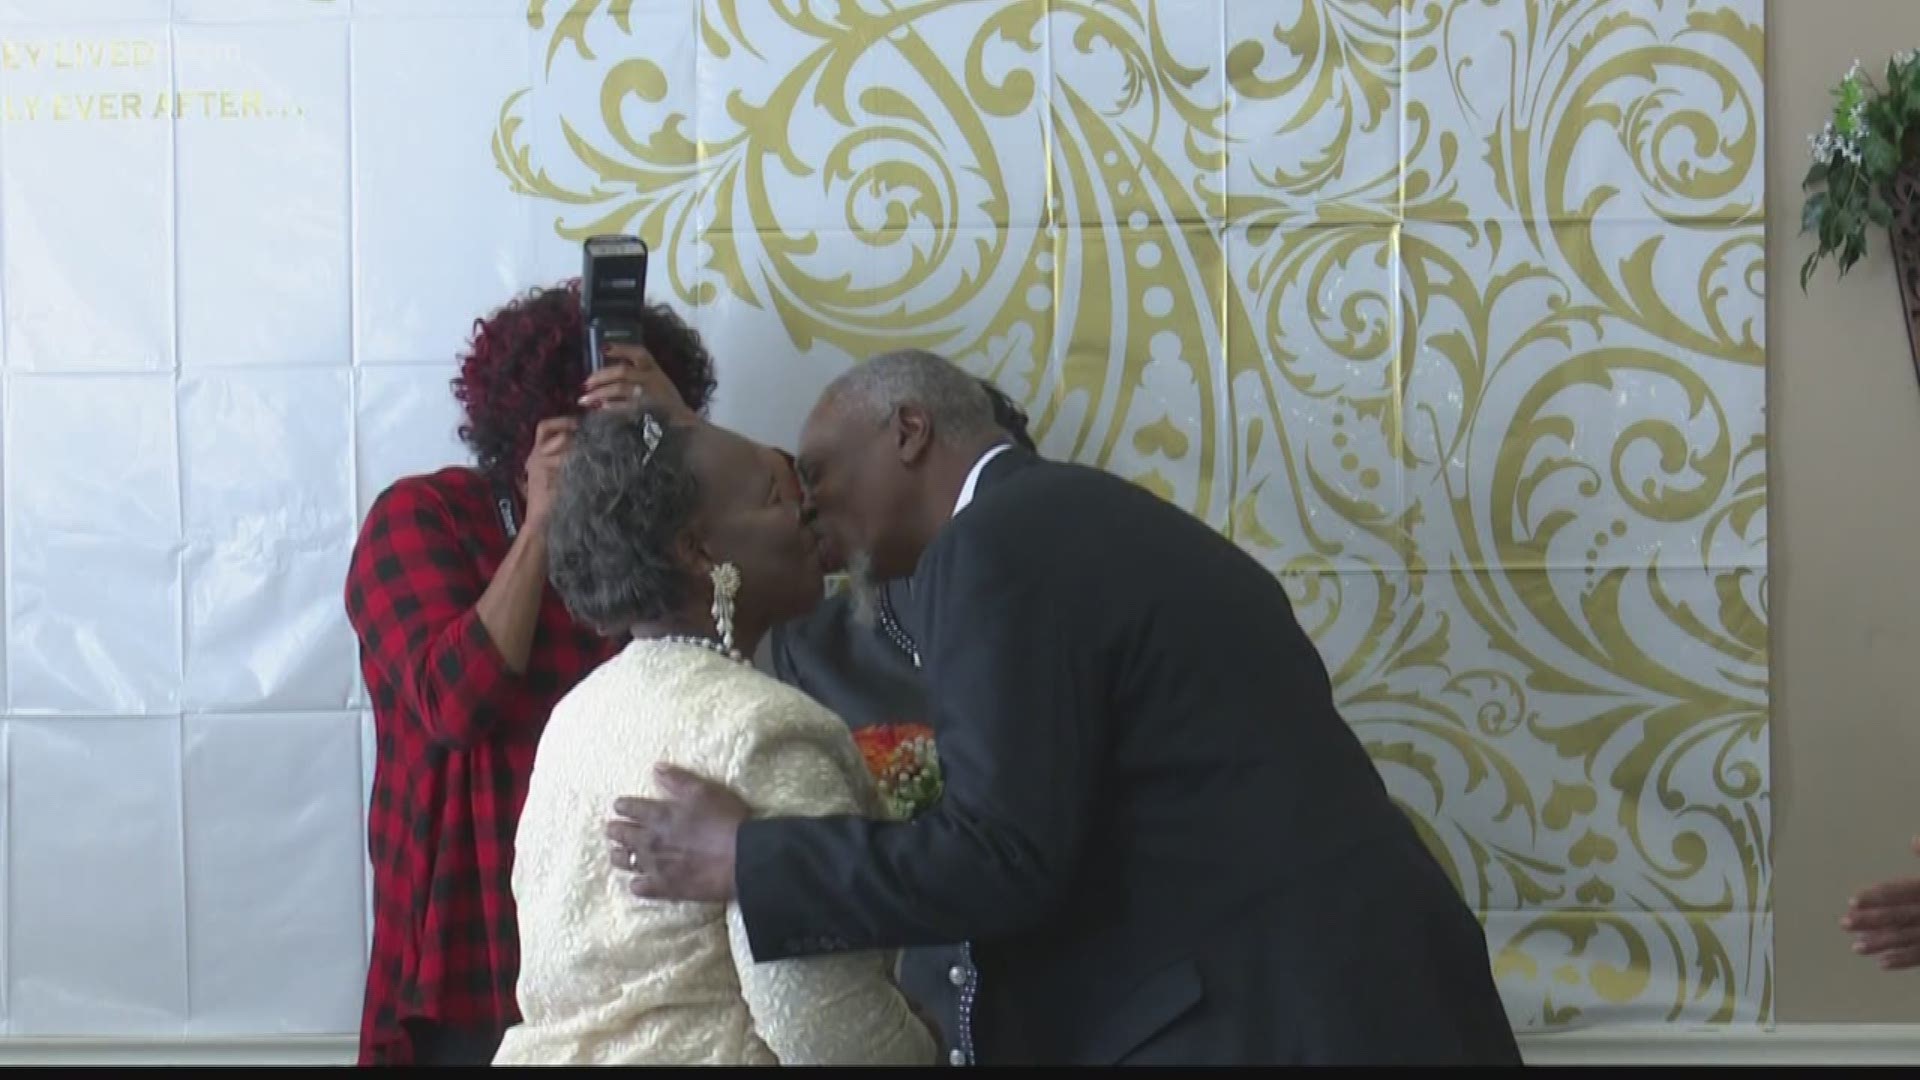 On Valentine's Day, two people who were once homeless tied the knot at an unusual location.